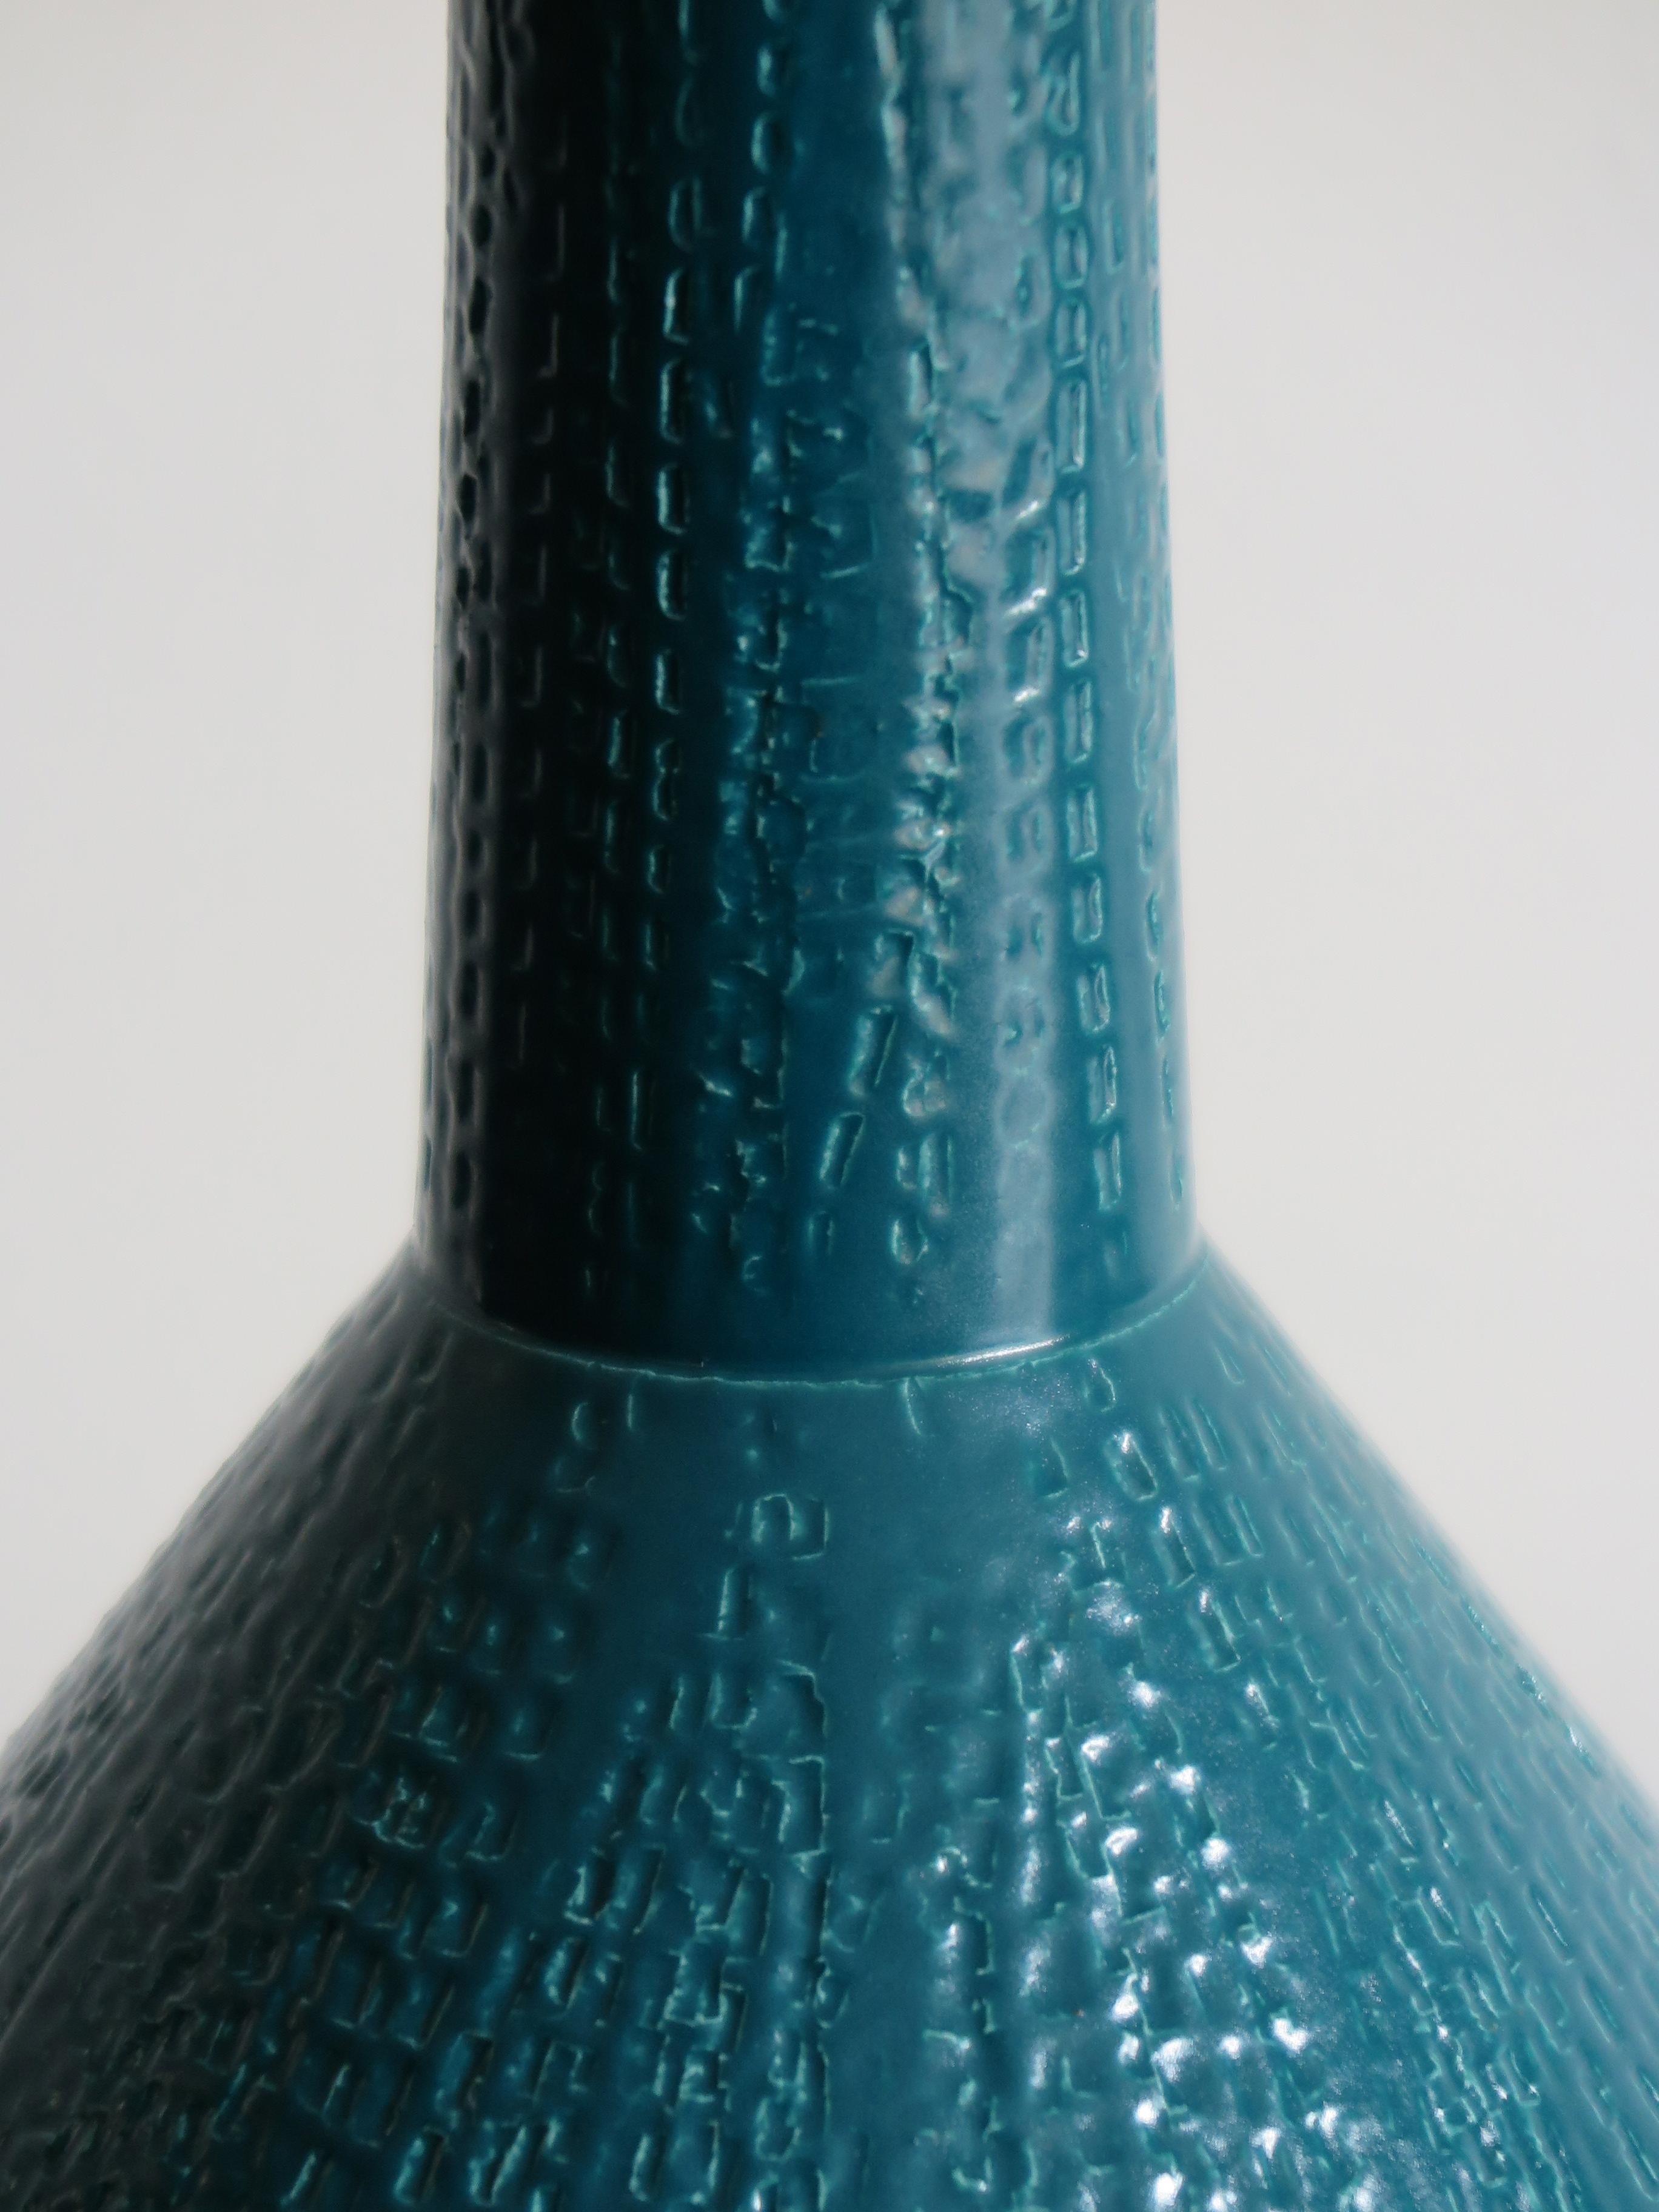 Contemporary Blue Green Ceramic Vases Designed by Capperidicasa, Made in Italy 6